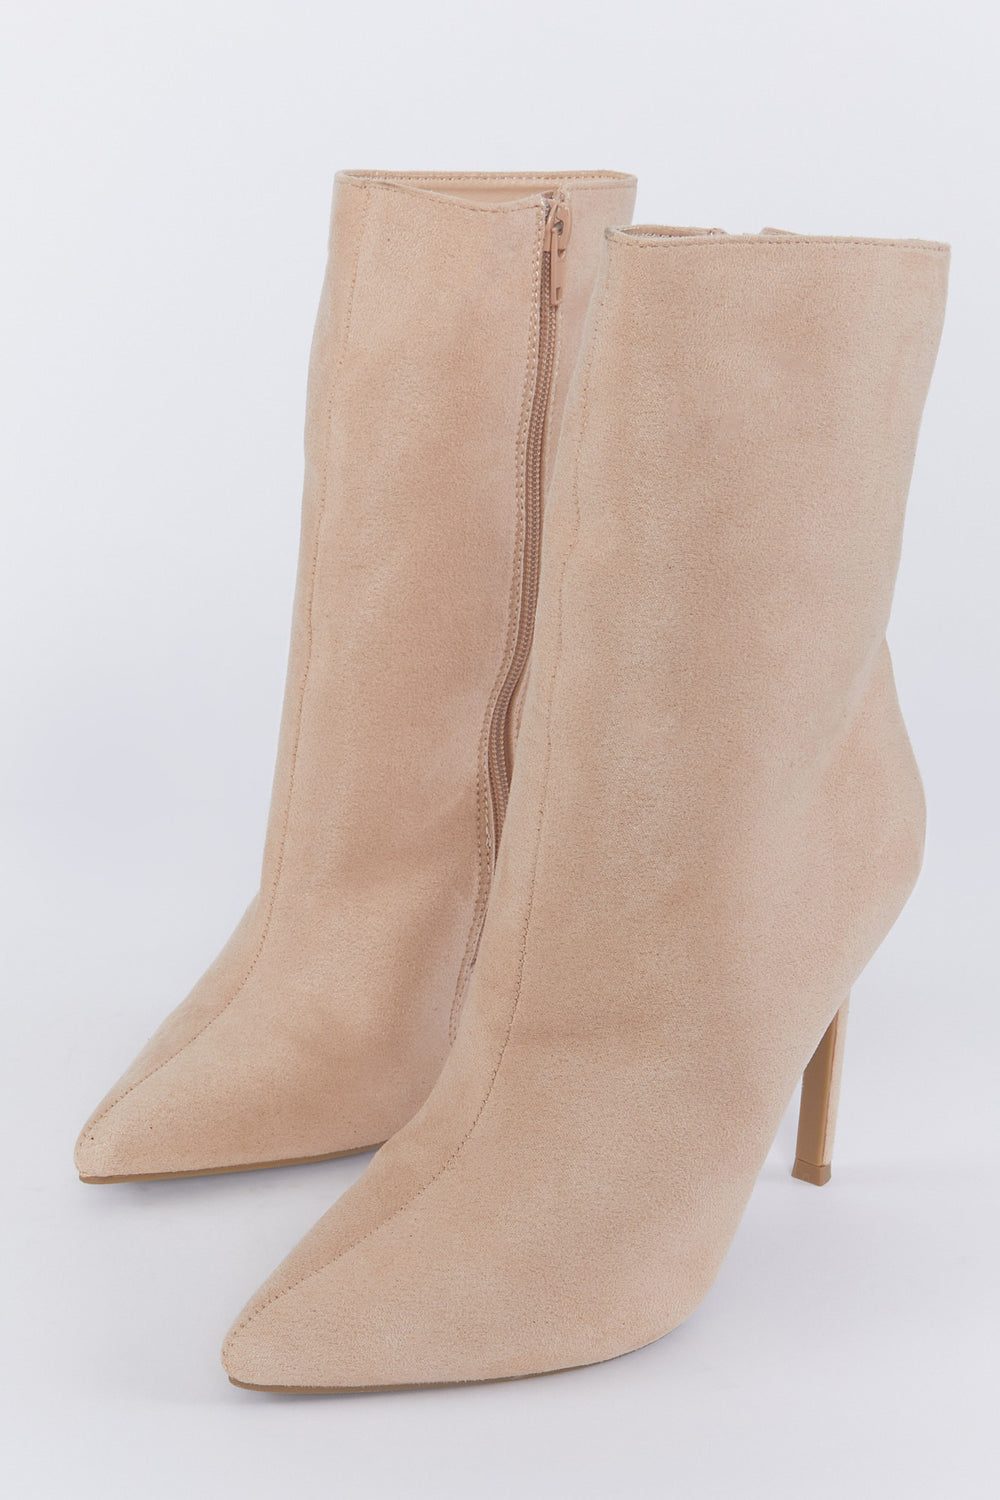 Faux-Suede Stiletto High Heel Boot Taupe